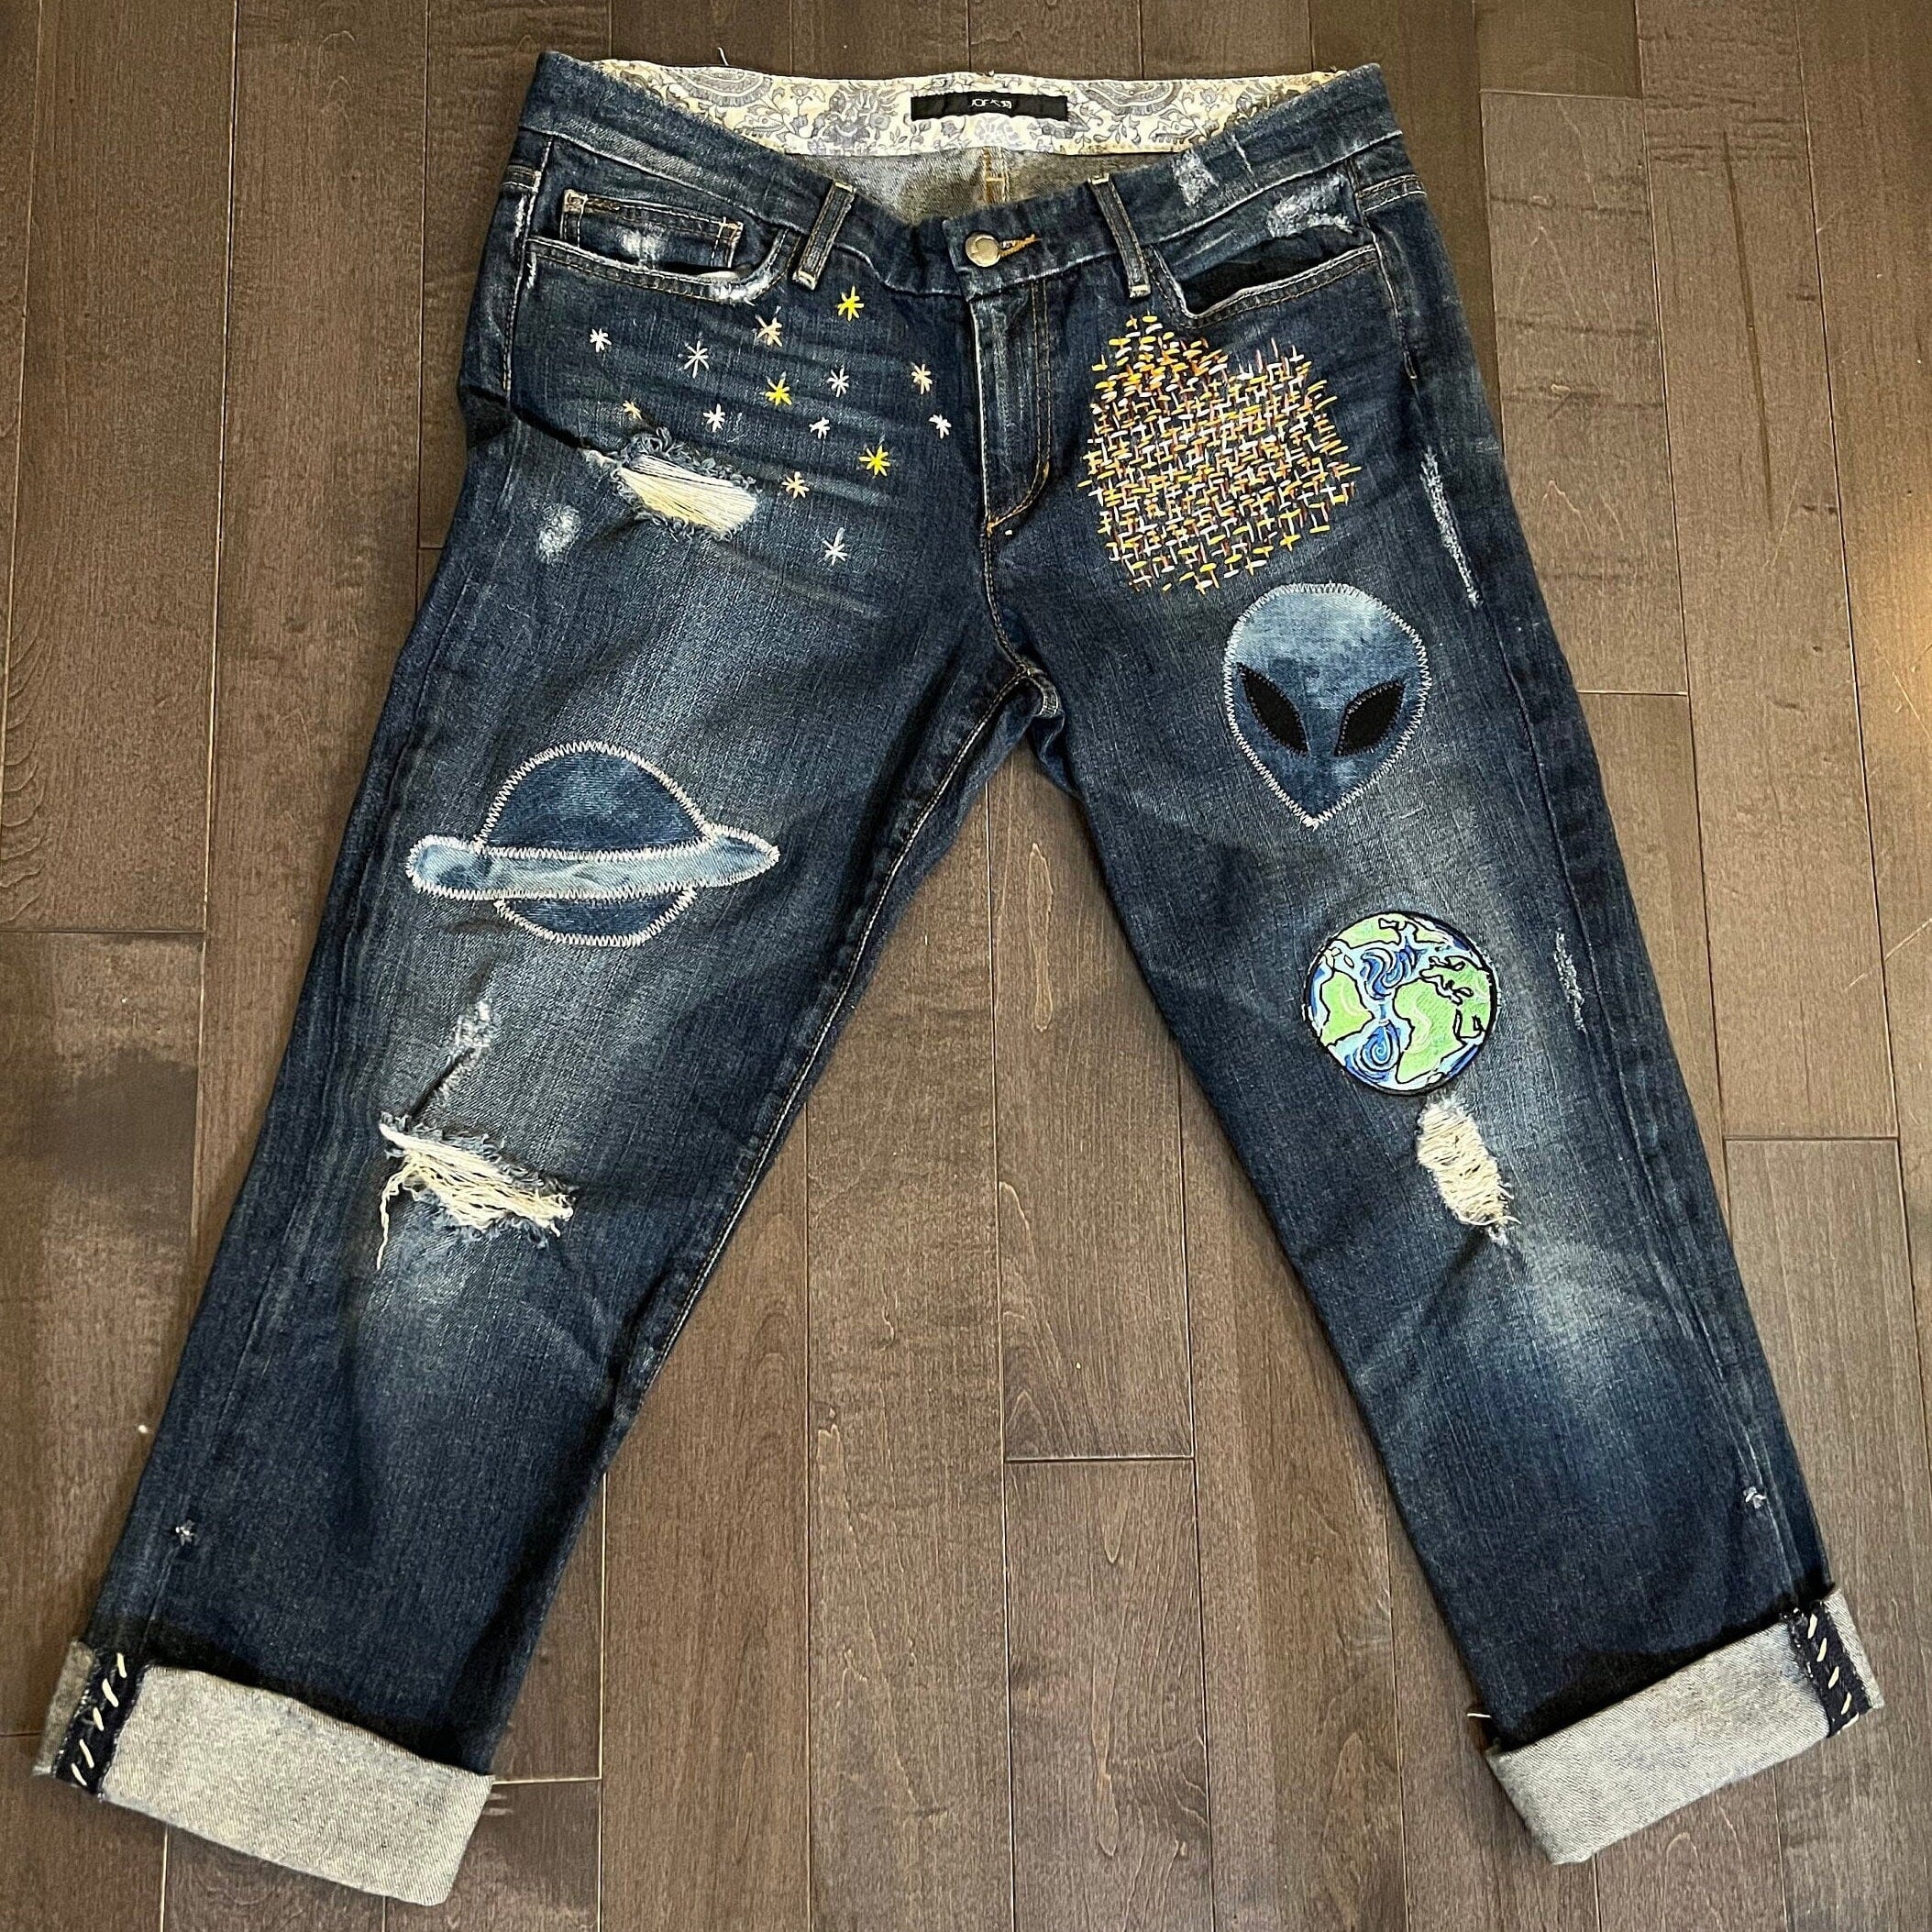 I Need My Space Jeans JOE&#39;S Jeans Appliques Patched Ladies Size 30 SPACE Aliens Planets ROCKETS Hand Embroidery Ripped Cuffed Pants